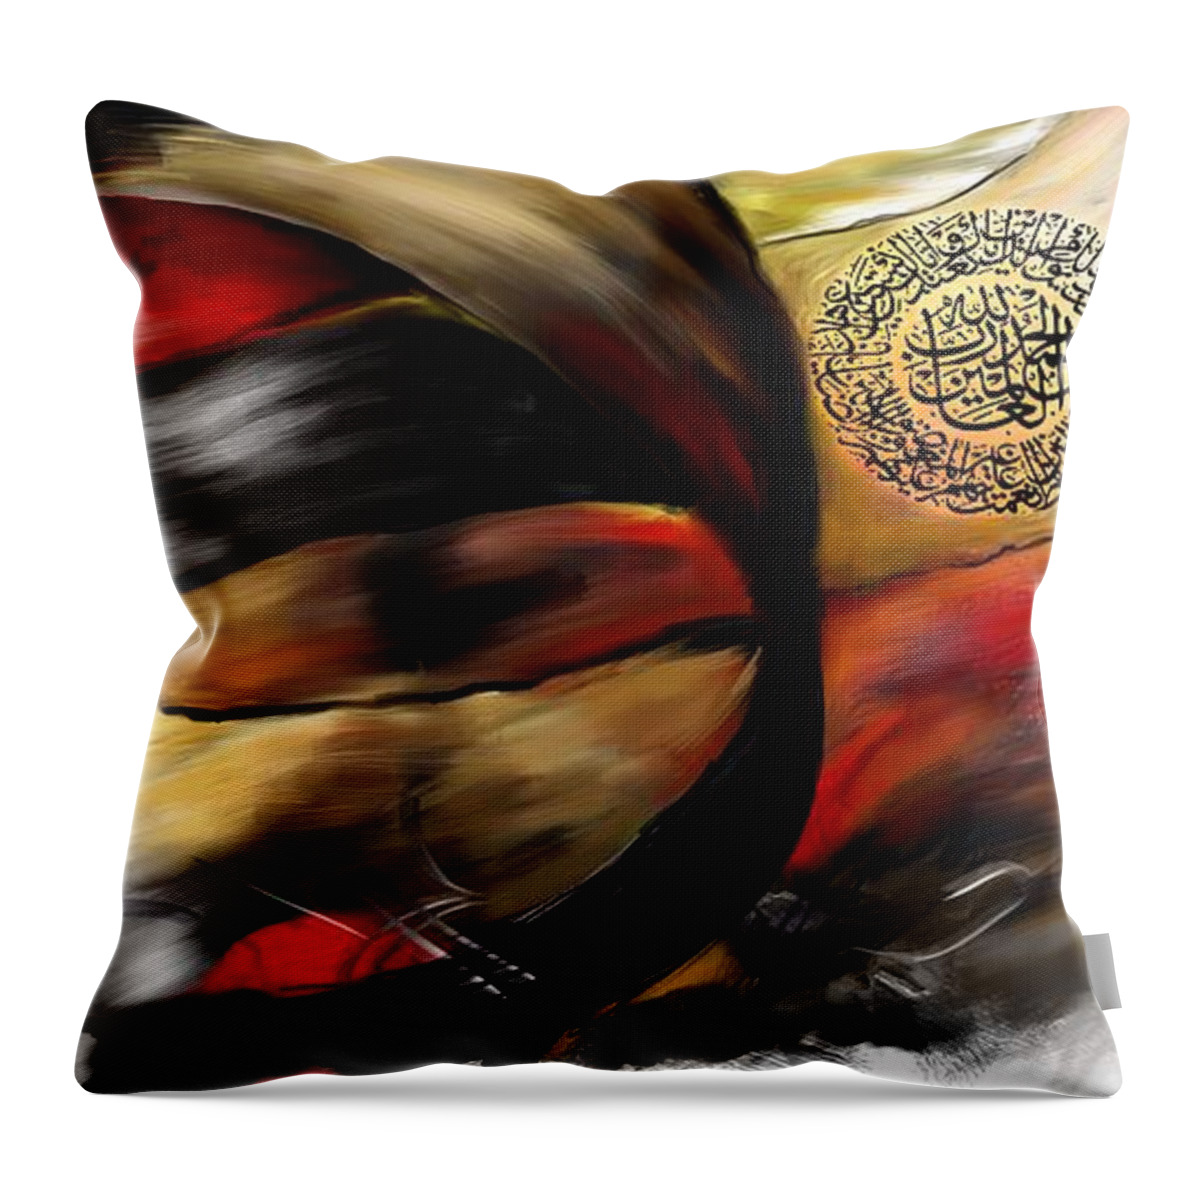 Kufic Calligraphy Throw Pillow featuring the painting TCM Calligraphy 10 by Team CATF